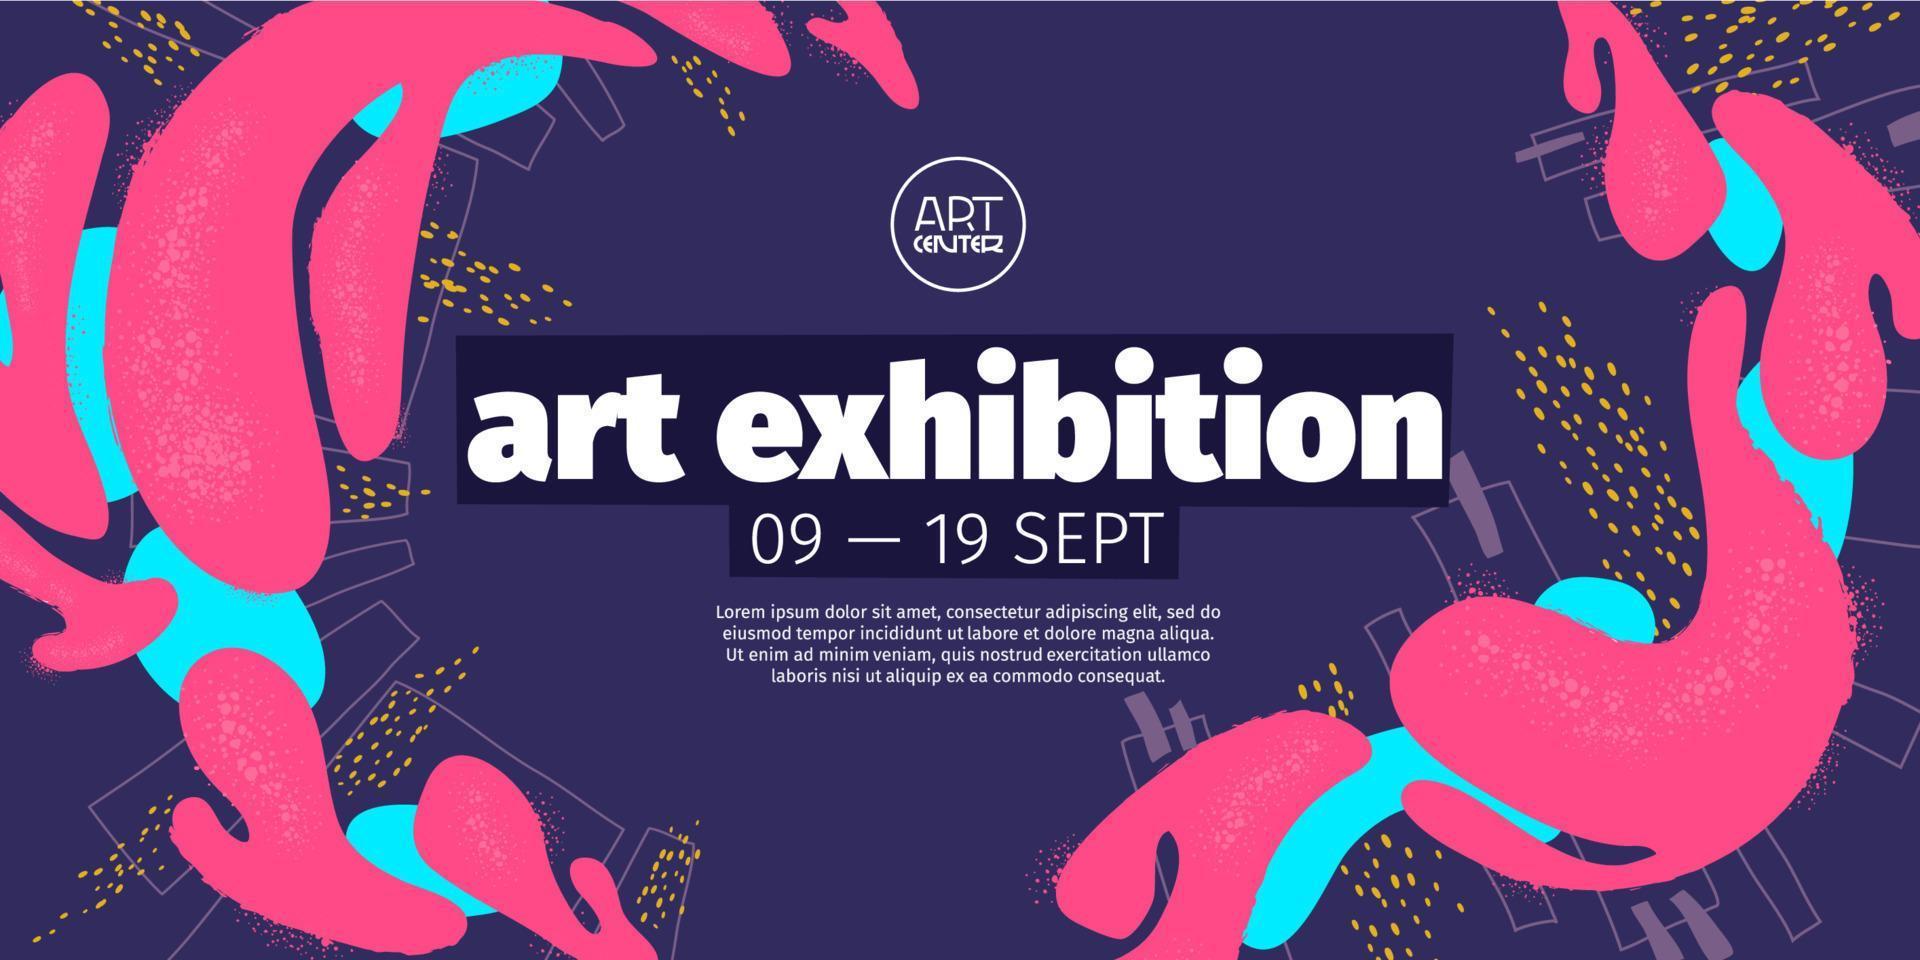 Art exhibition poster with abstract painting vector